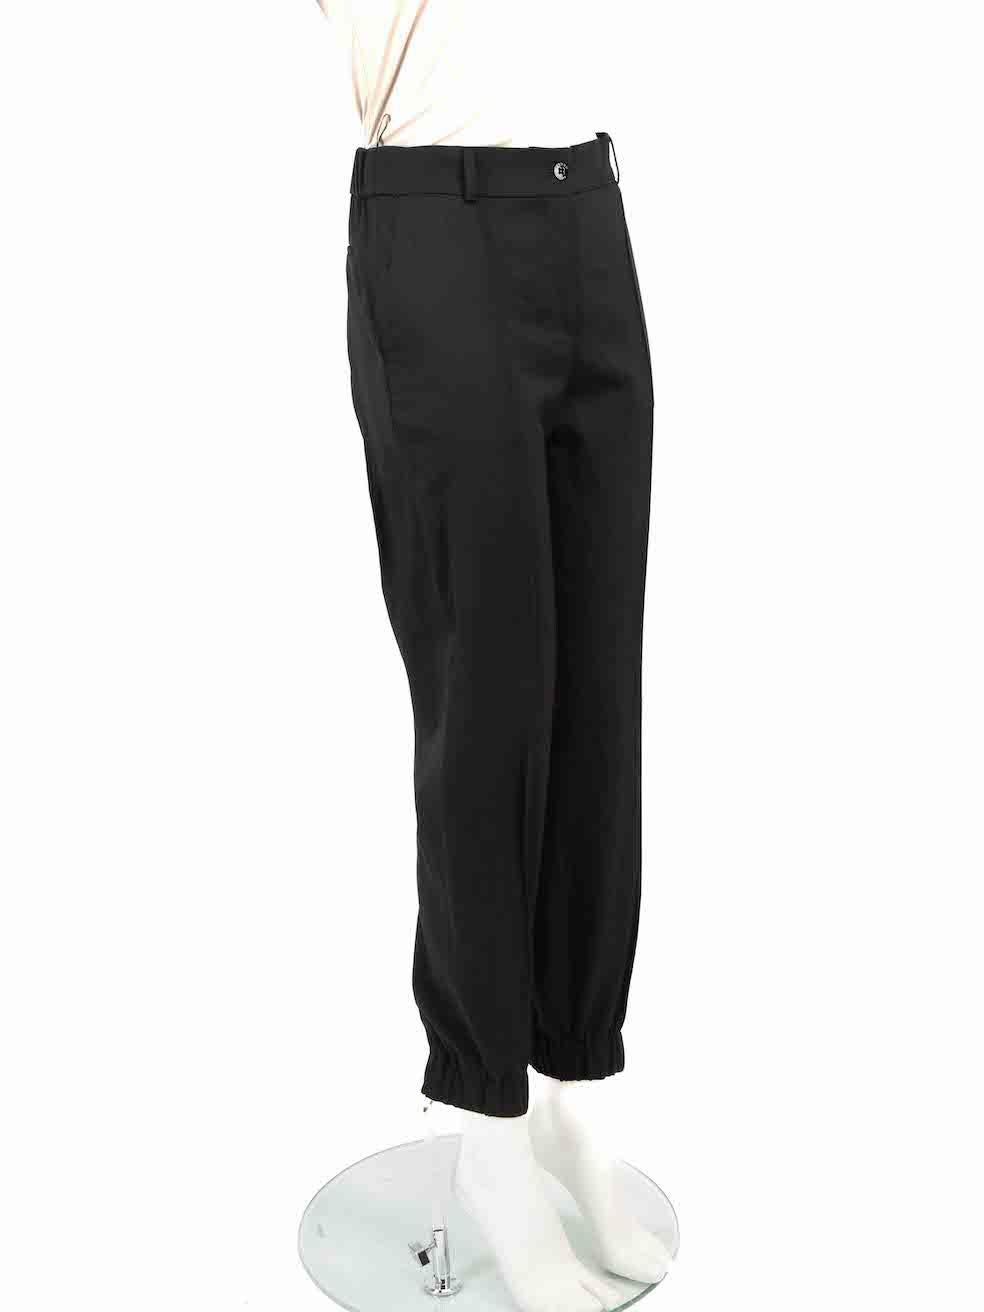 CONDITION is Very good. Minimal wear to trousers is evident. Slight discolouration to the brand label on this used Kenzo designer resale item.
 
 Details
 Black
 Wool
 Trousers
 Tapered leg
 High rise
 Elasticated waistband and cuffs
 2x Side